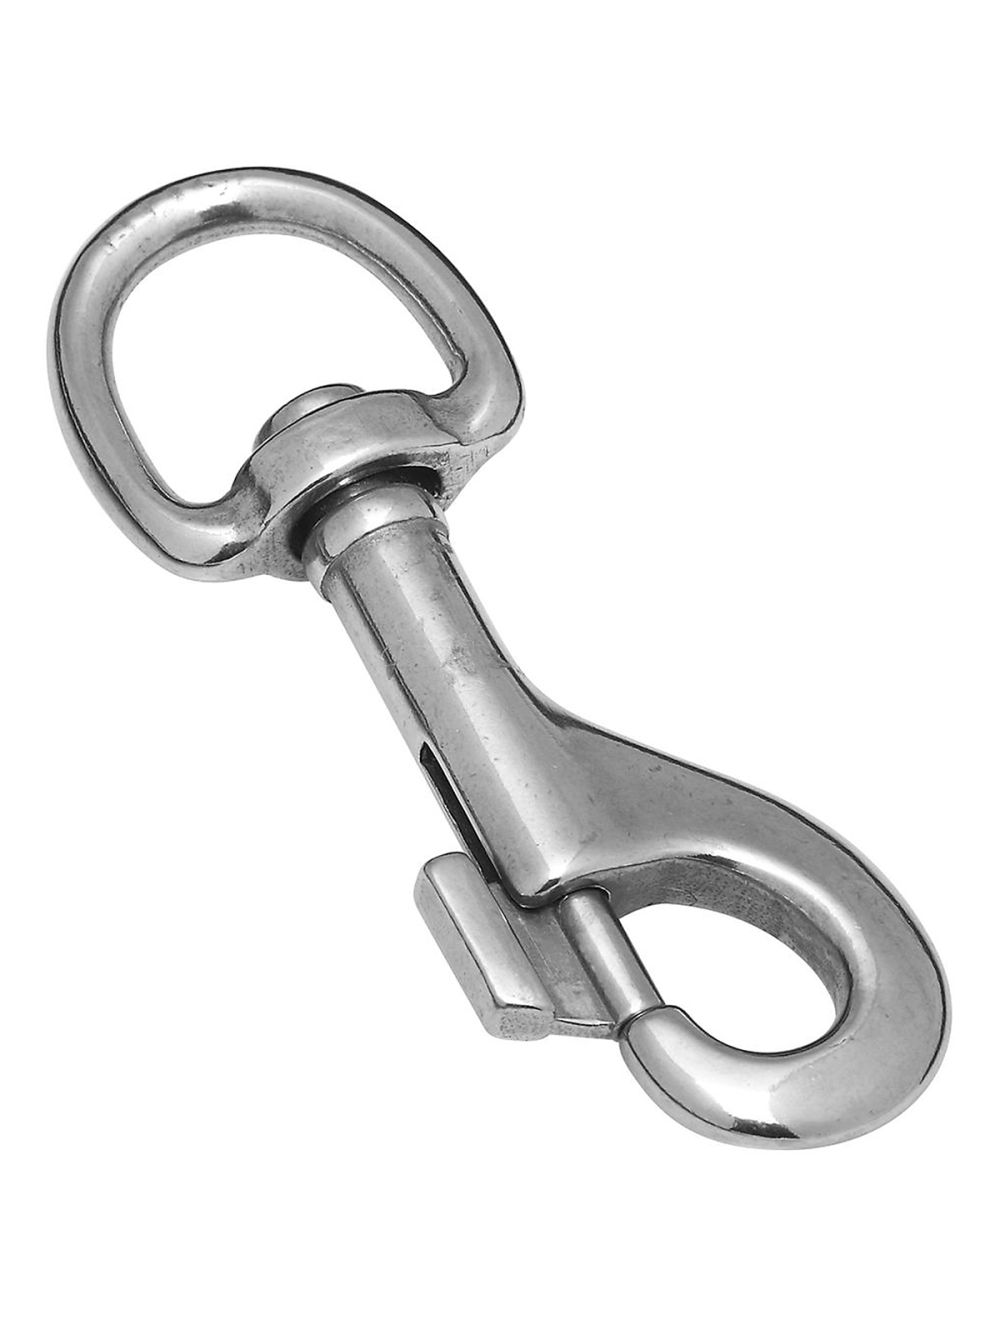 Stanley National 3158BC 3/4 x 3-9/16 Stainless Steel Bolt Snap Hook with Swivel  Eye